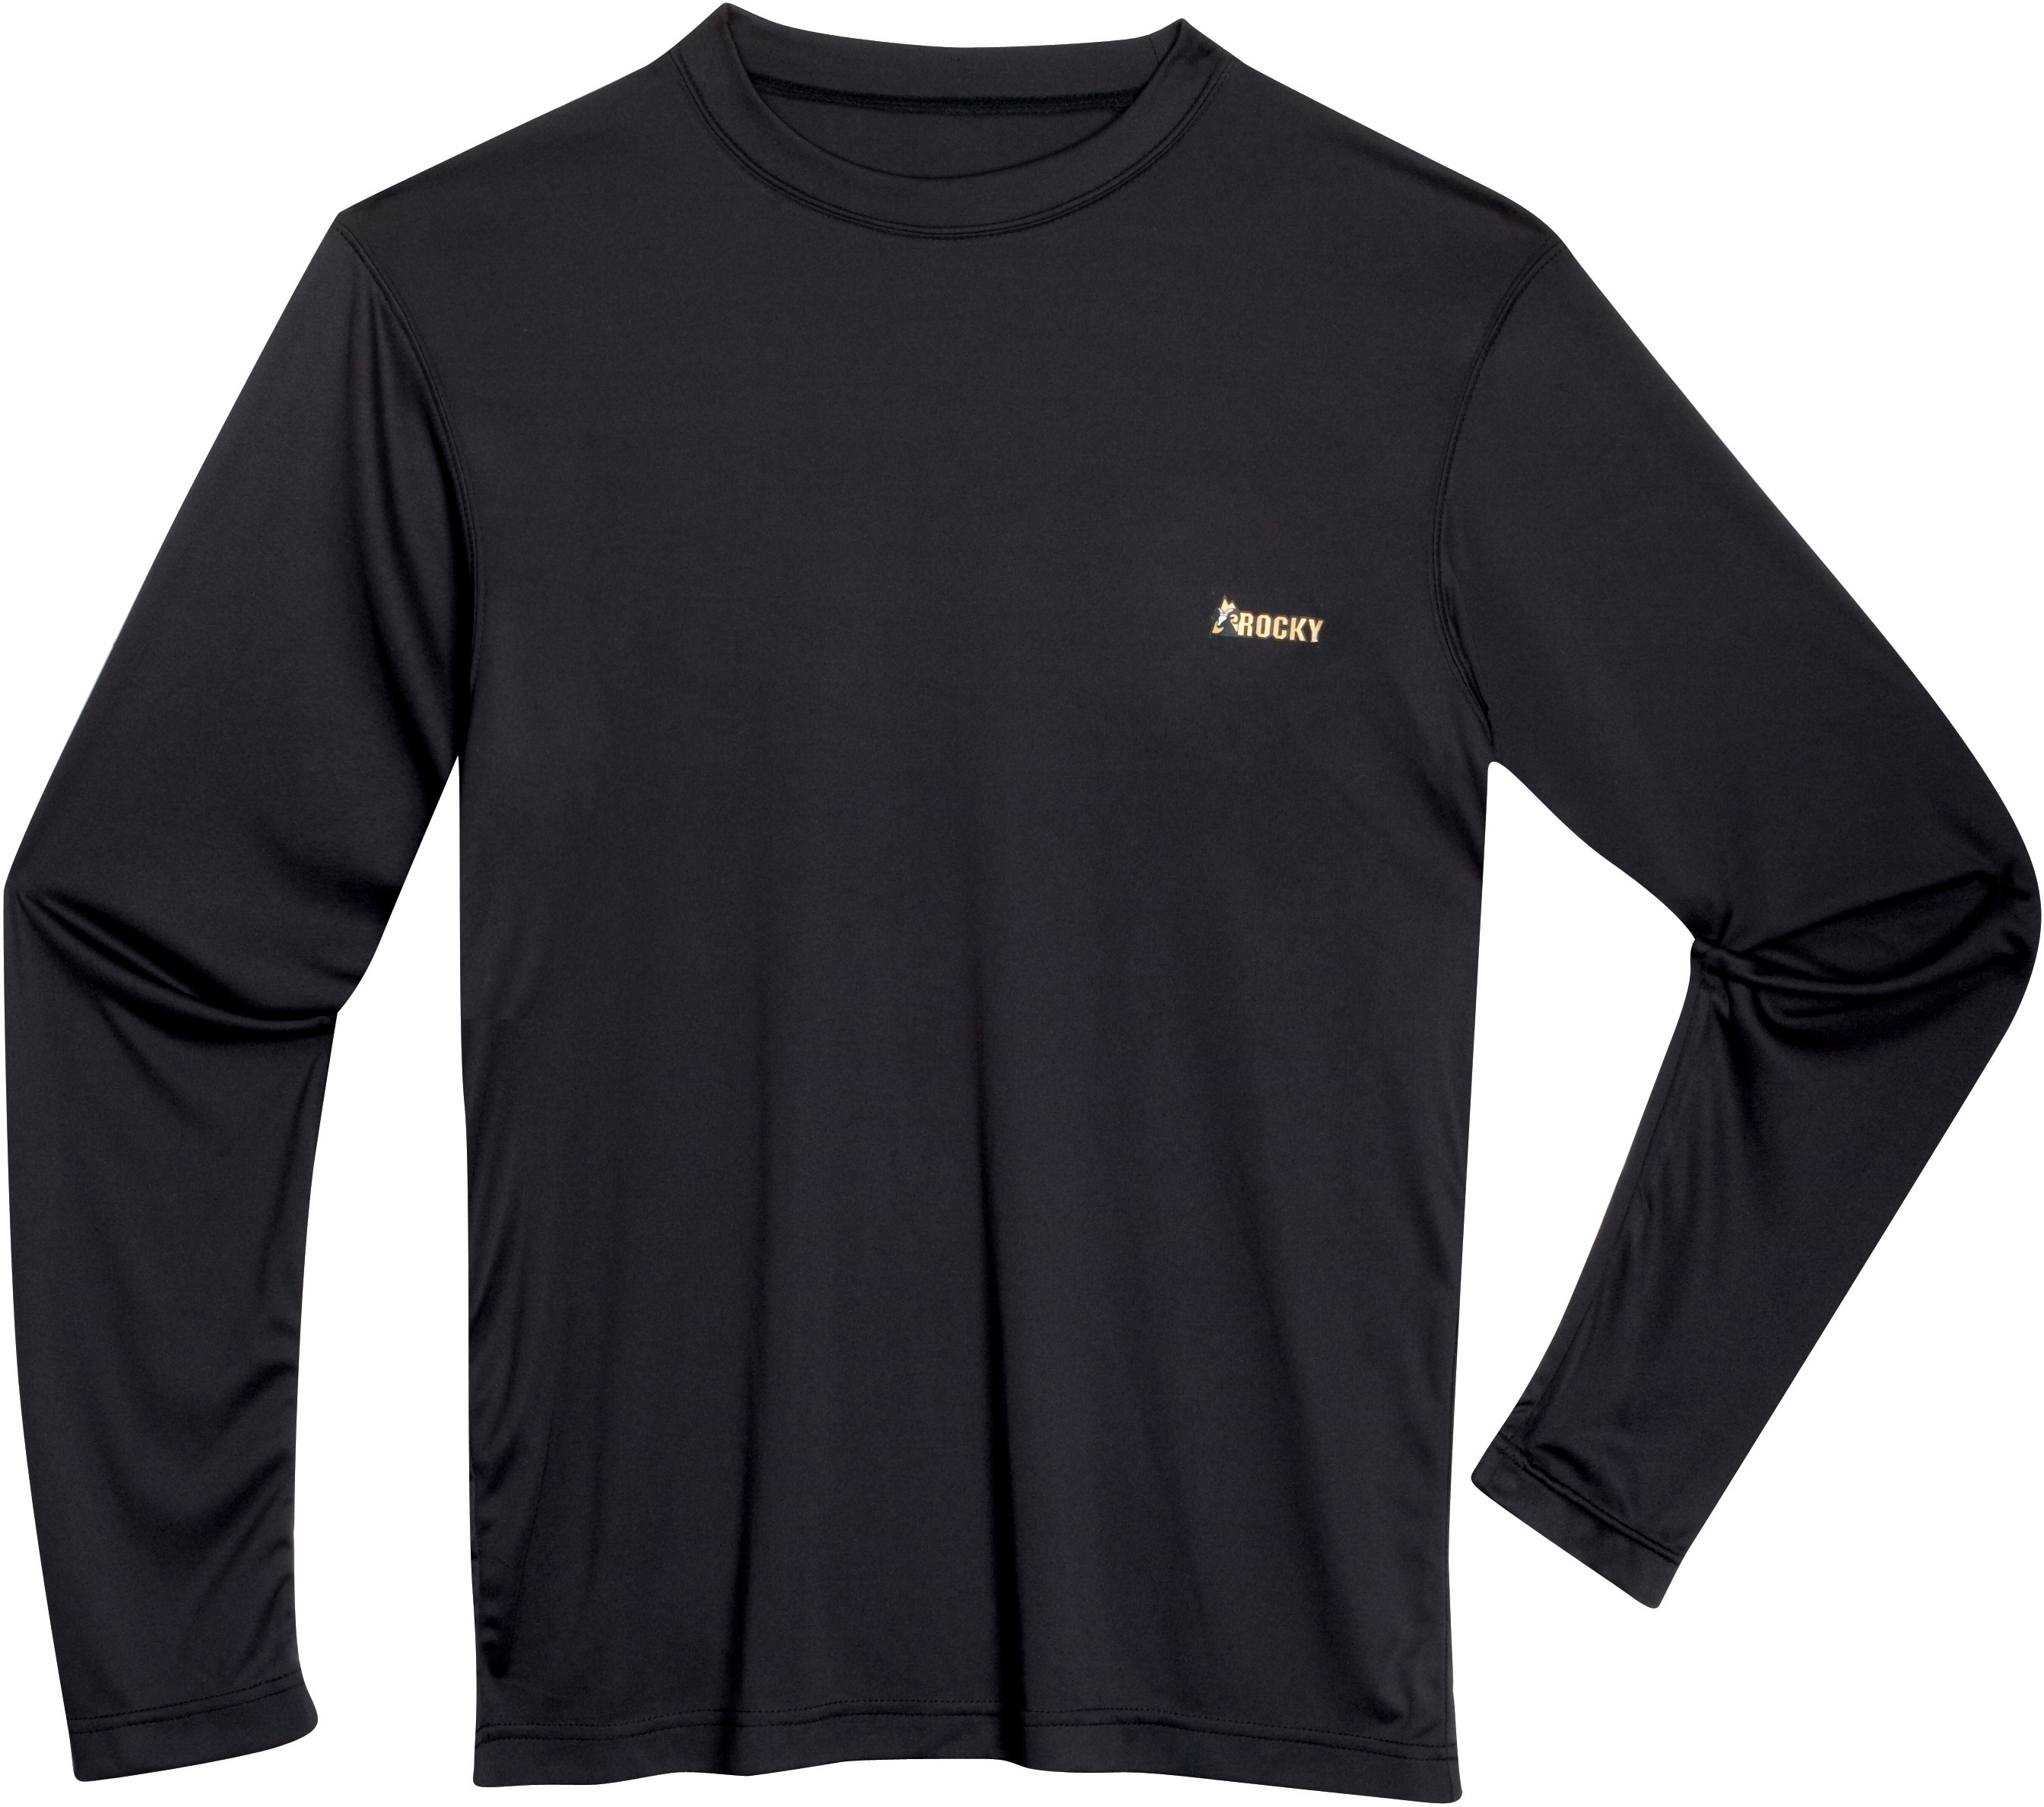 ROCKY Thermal Underwear: Men's Base Layer Black Thermal Top - Style  #601710WMT